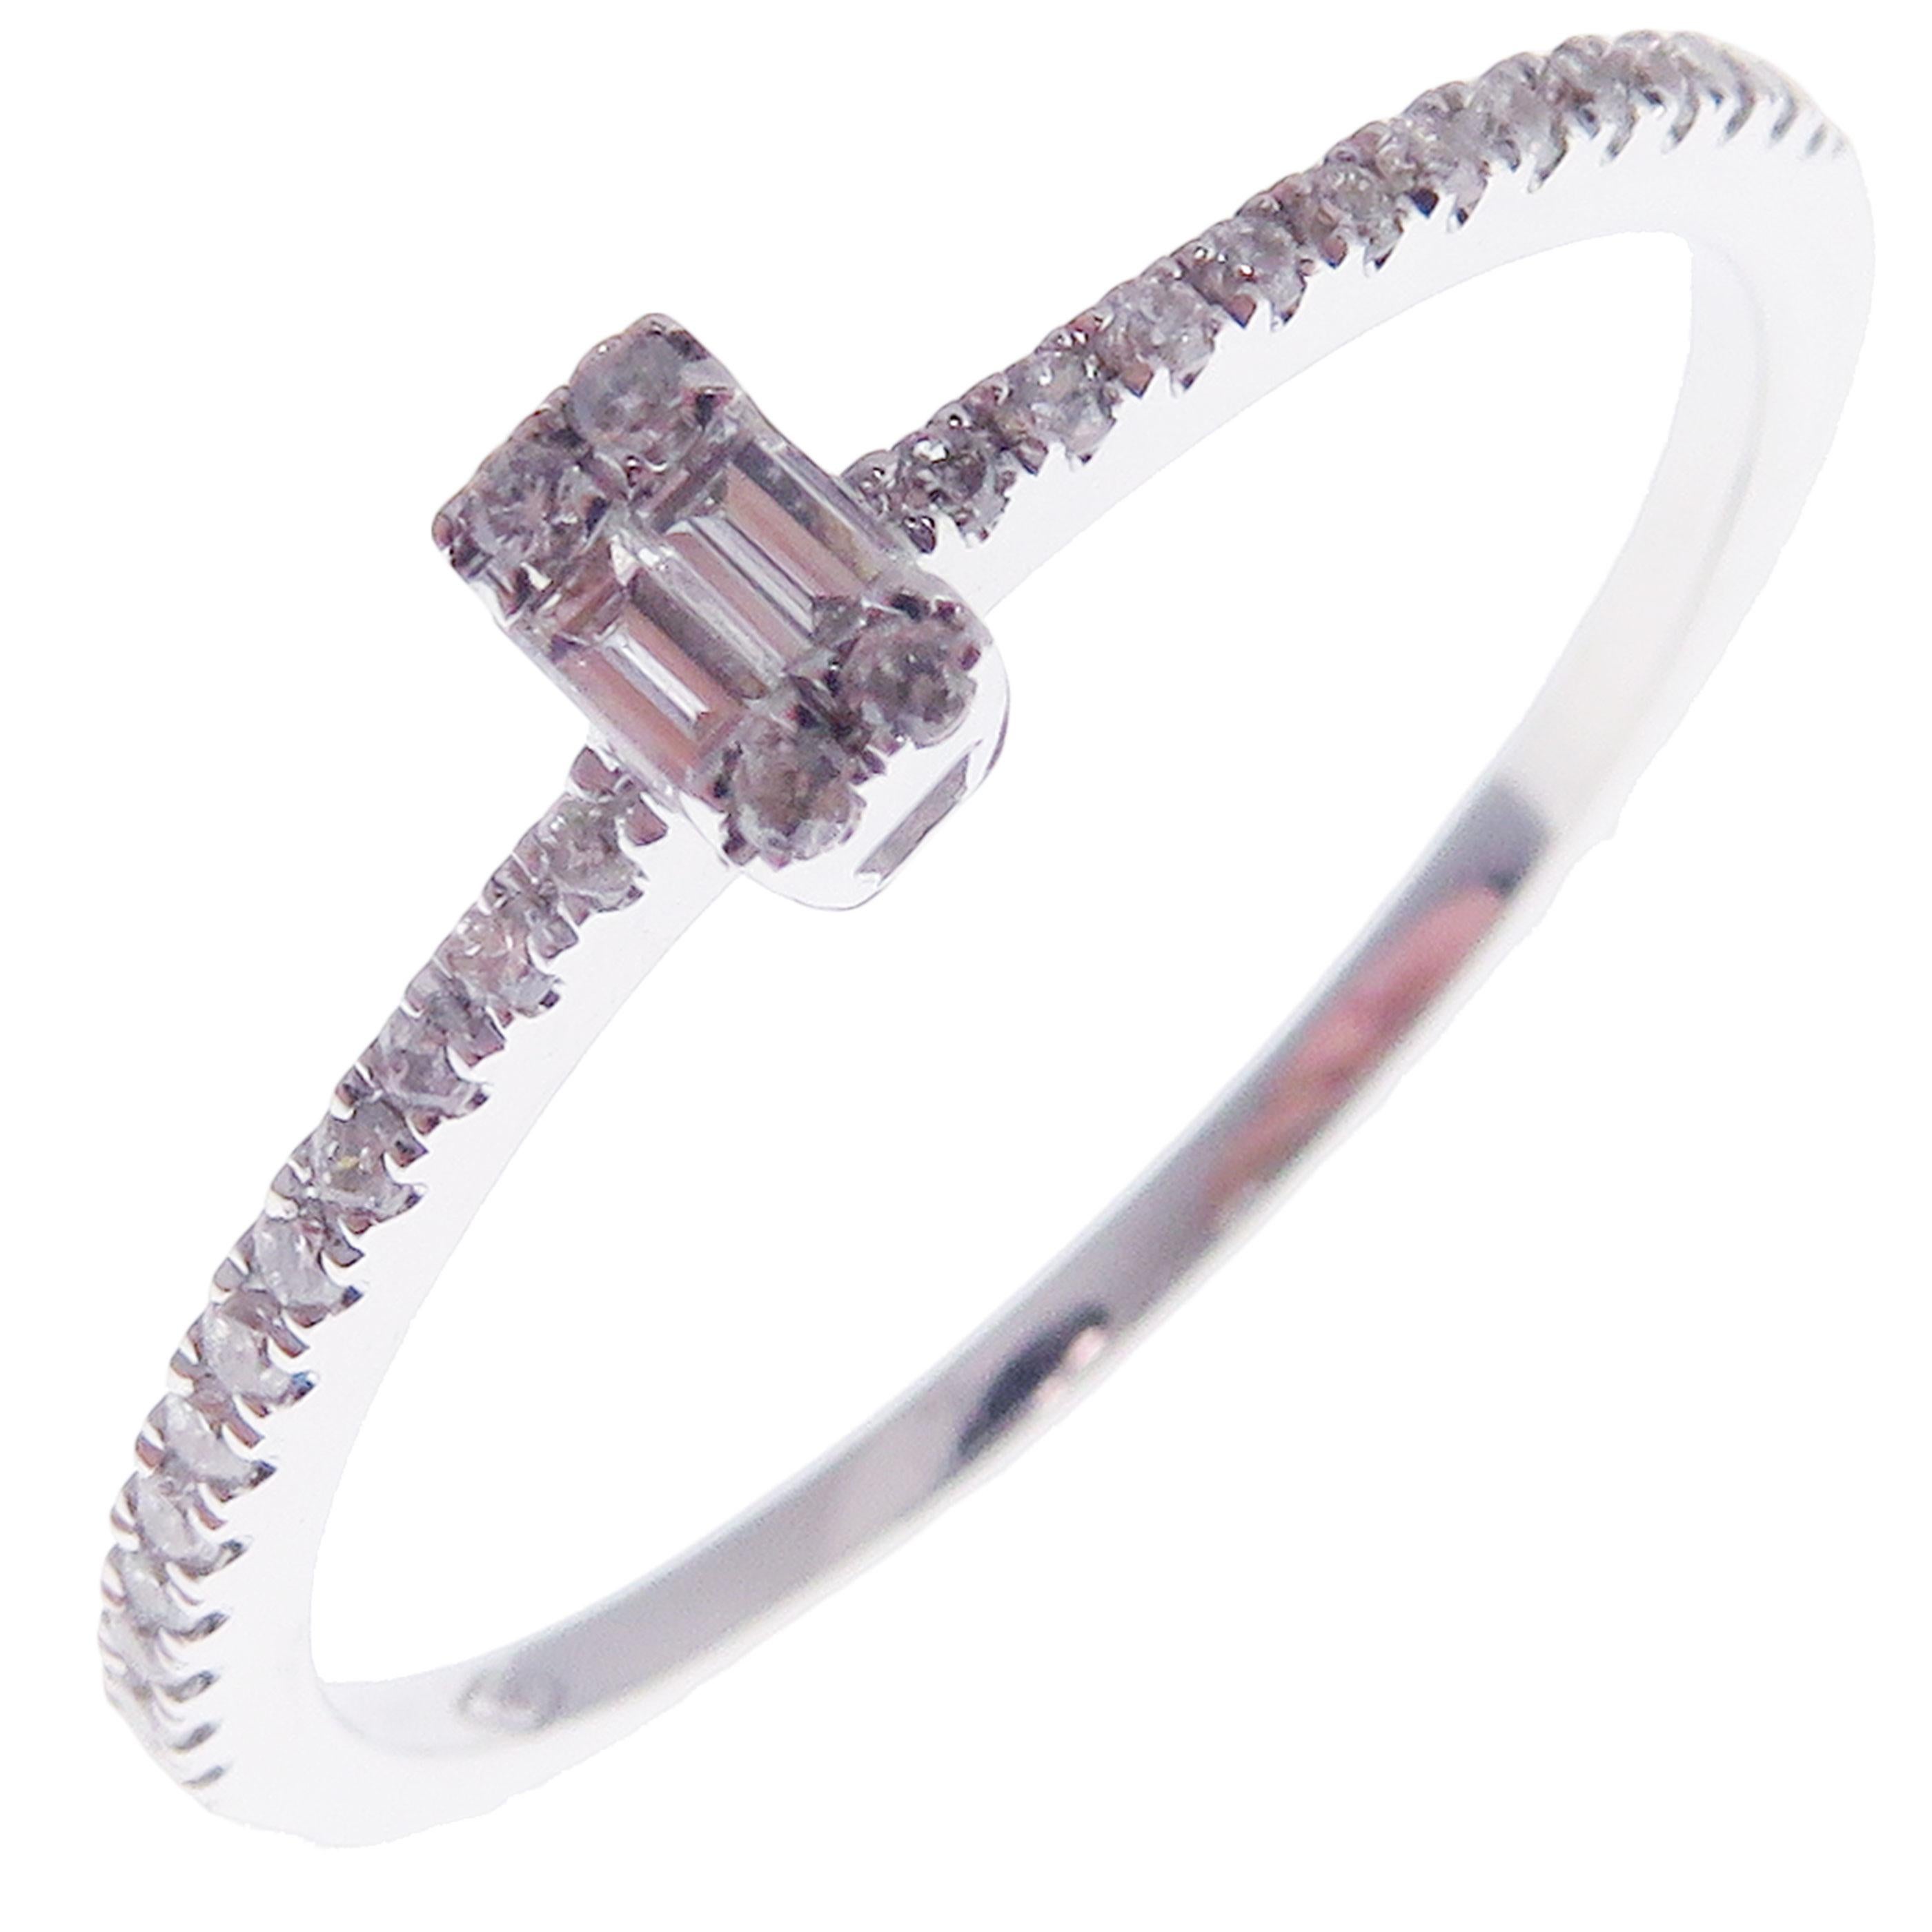 This simple stackable illusion ring is crafted in 18-karat white gold, featuring 28 round white diamonds totaling of 0.11 carats and 2 baguette white diamond totaling of 0.06 carats.
Approximate total weight 1.54 grams.
Standard Ring size 7
SI-G